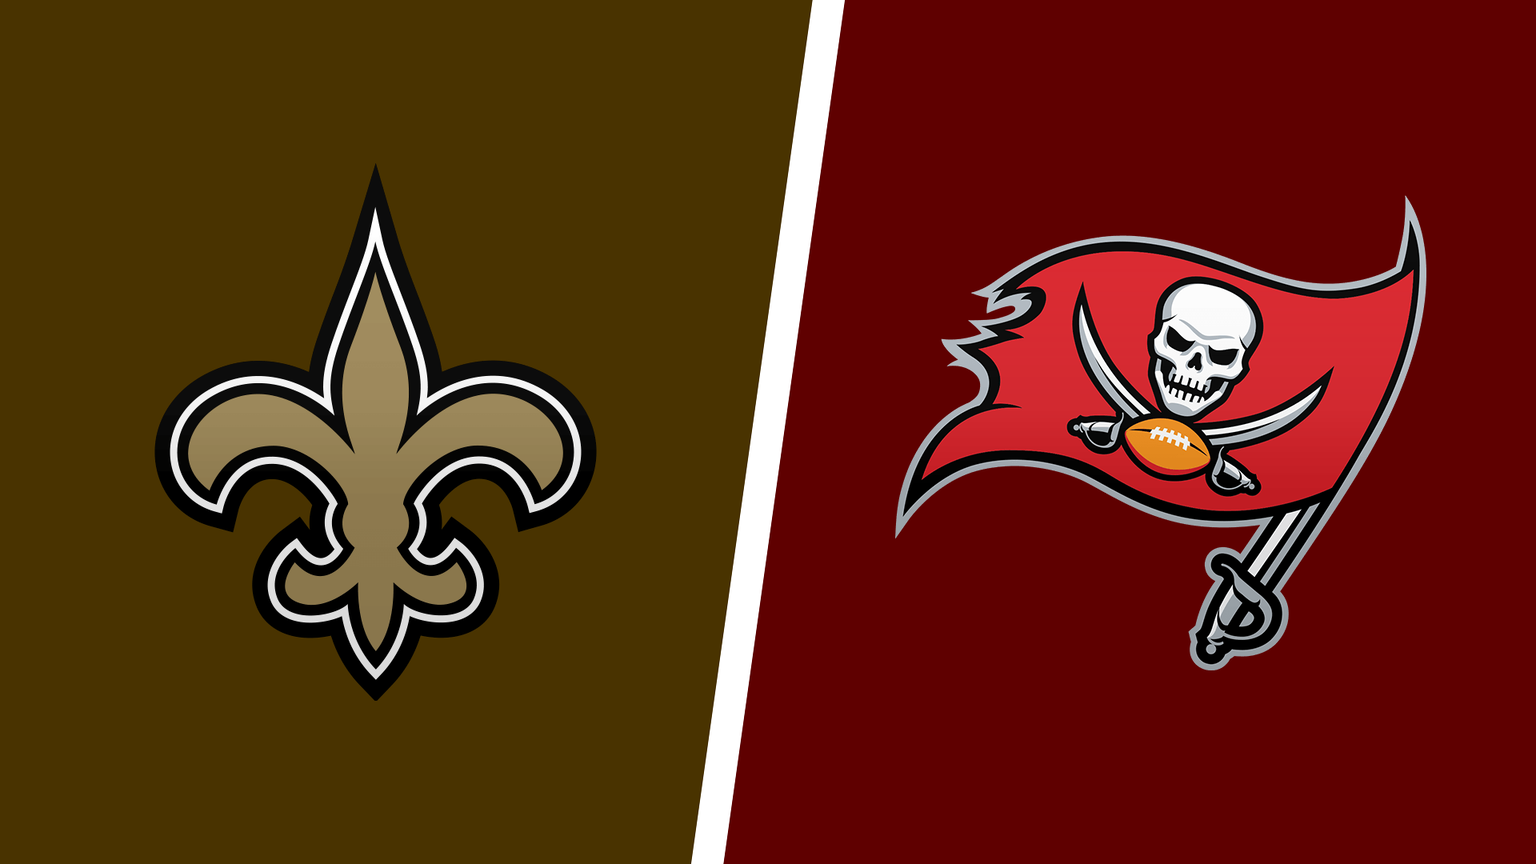 How To Watch Tampa Bay Buccaneers Vs New Orleans Saints Week 2 Game Live Online On September 18